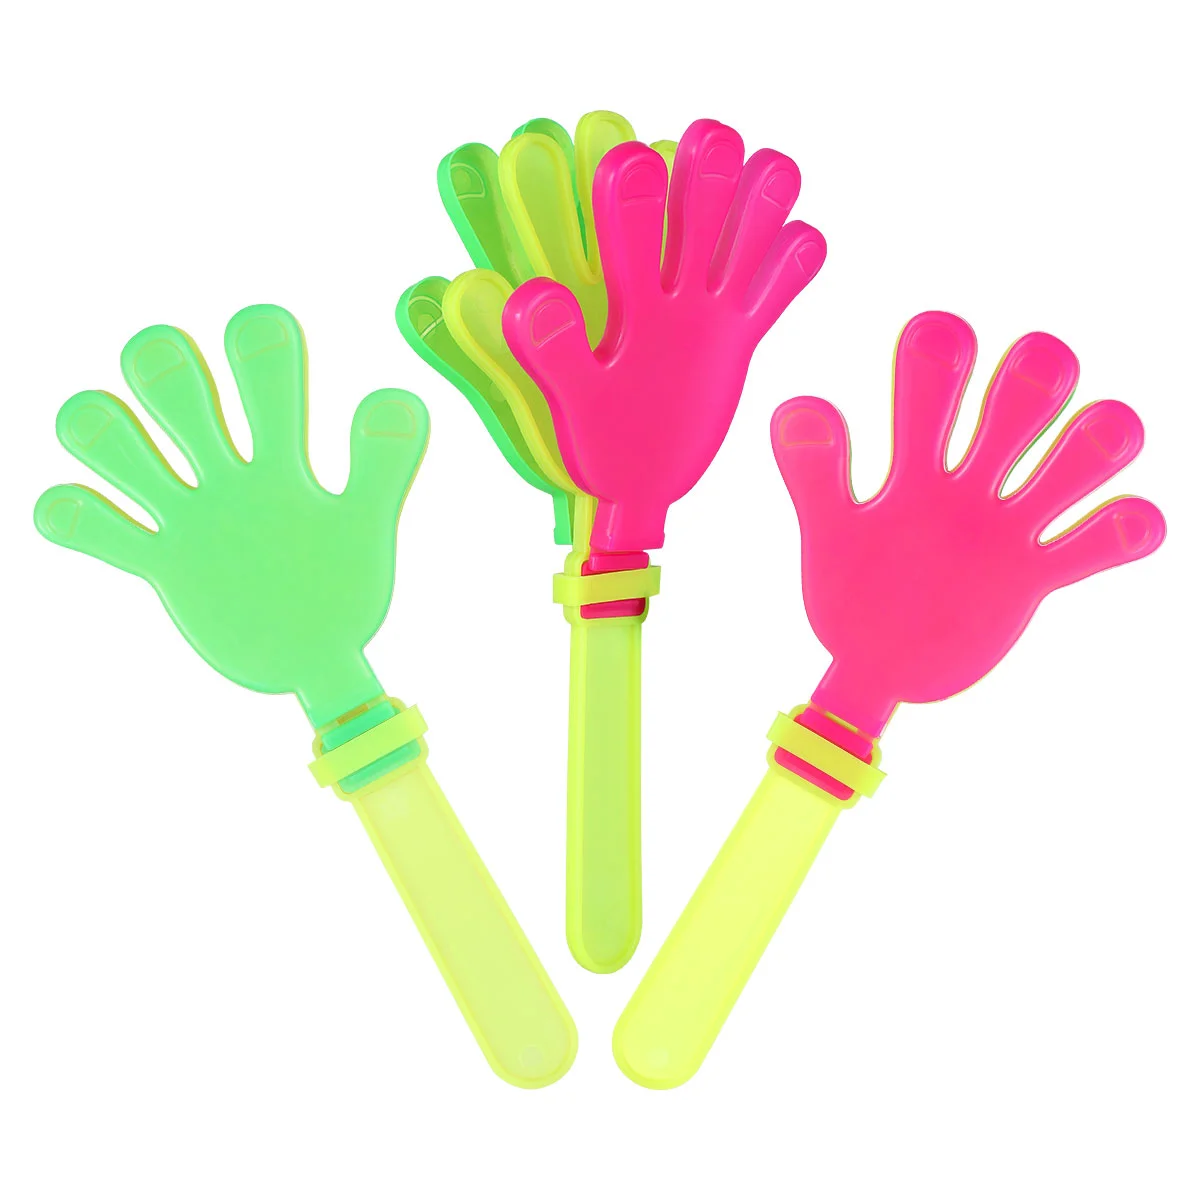 

Hand Makers Noise Clappers Noisemakers Plastic Hands Party Favors Clackers Clapping Clap Clapper Cheer Props Device Funny